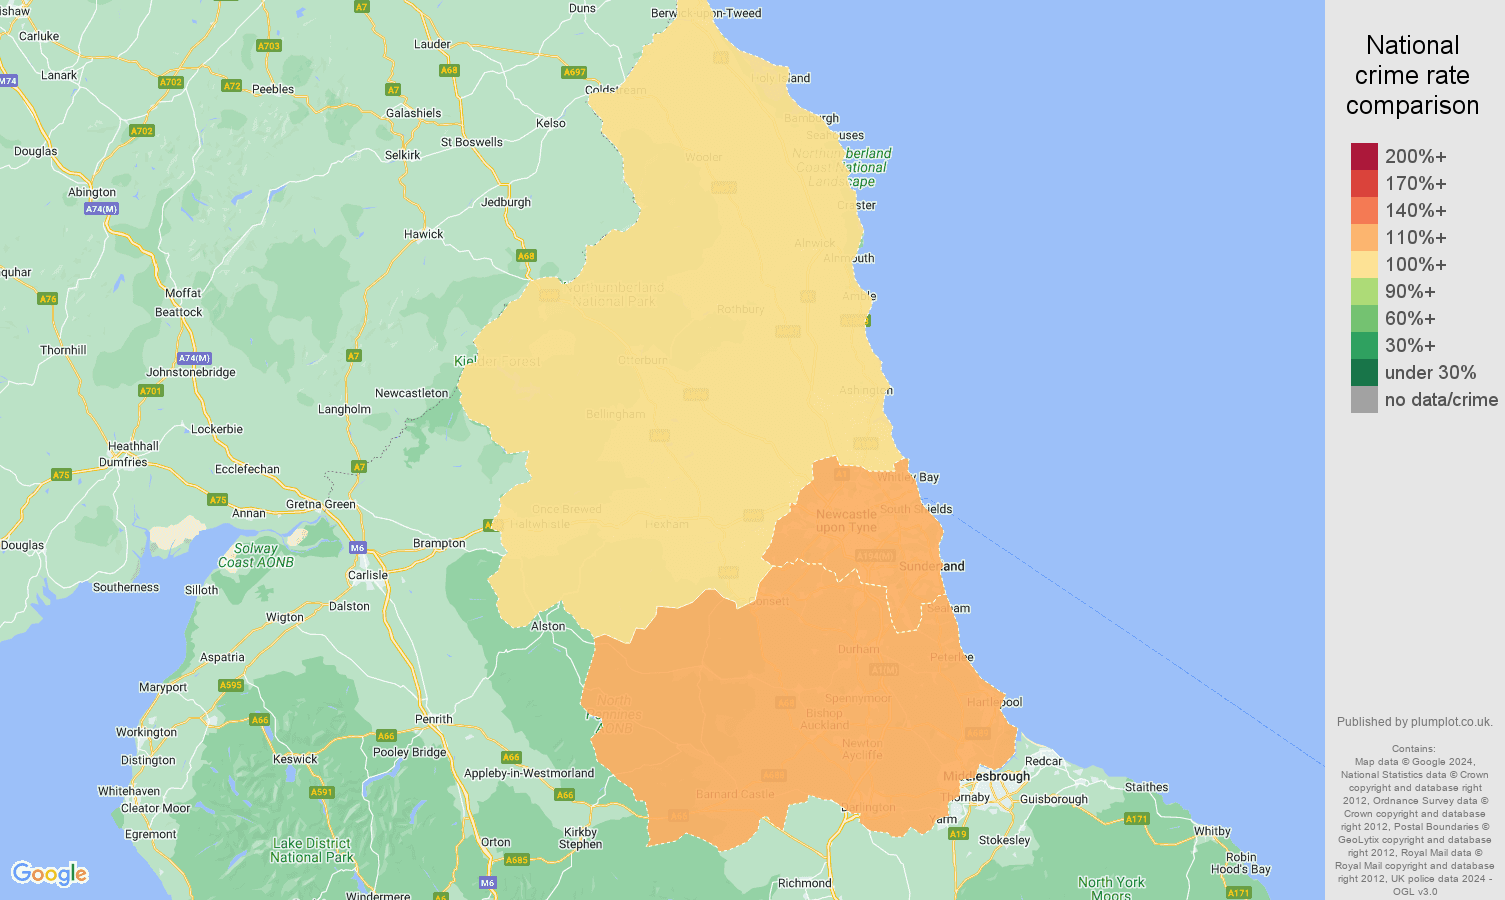 North East crime rate comparison map